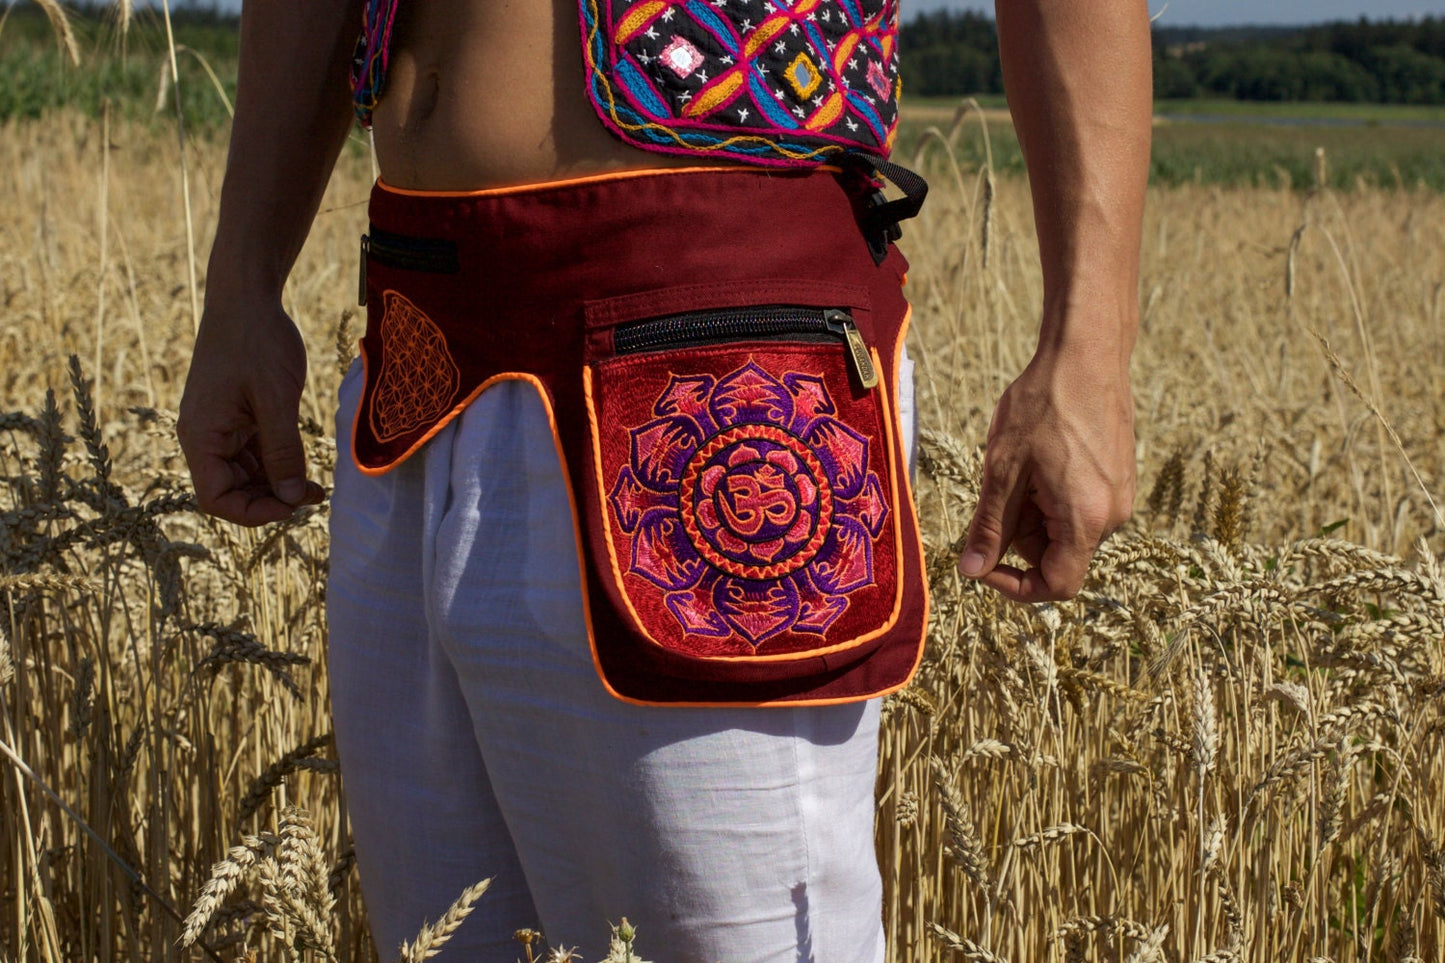 Beltbag red purple AUM mandala - 7 pockets, strong ziplocks, size adjustable with hook & loop and clip - blacklight active lines good luck